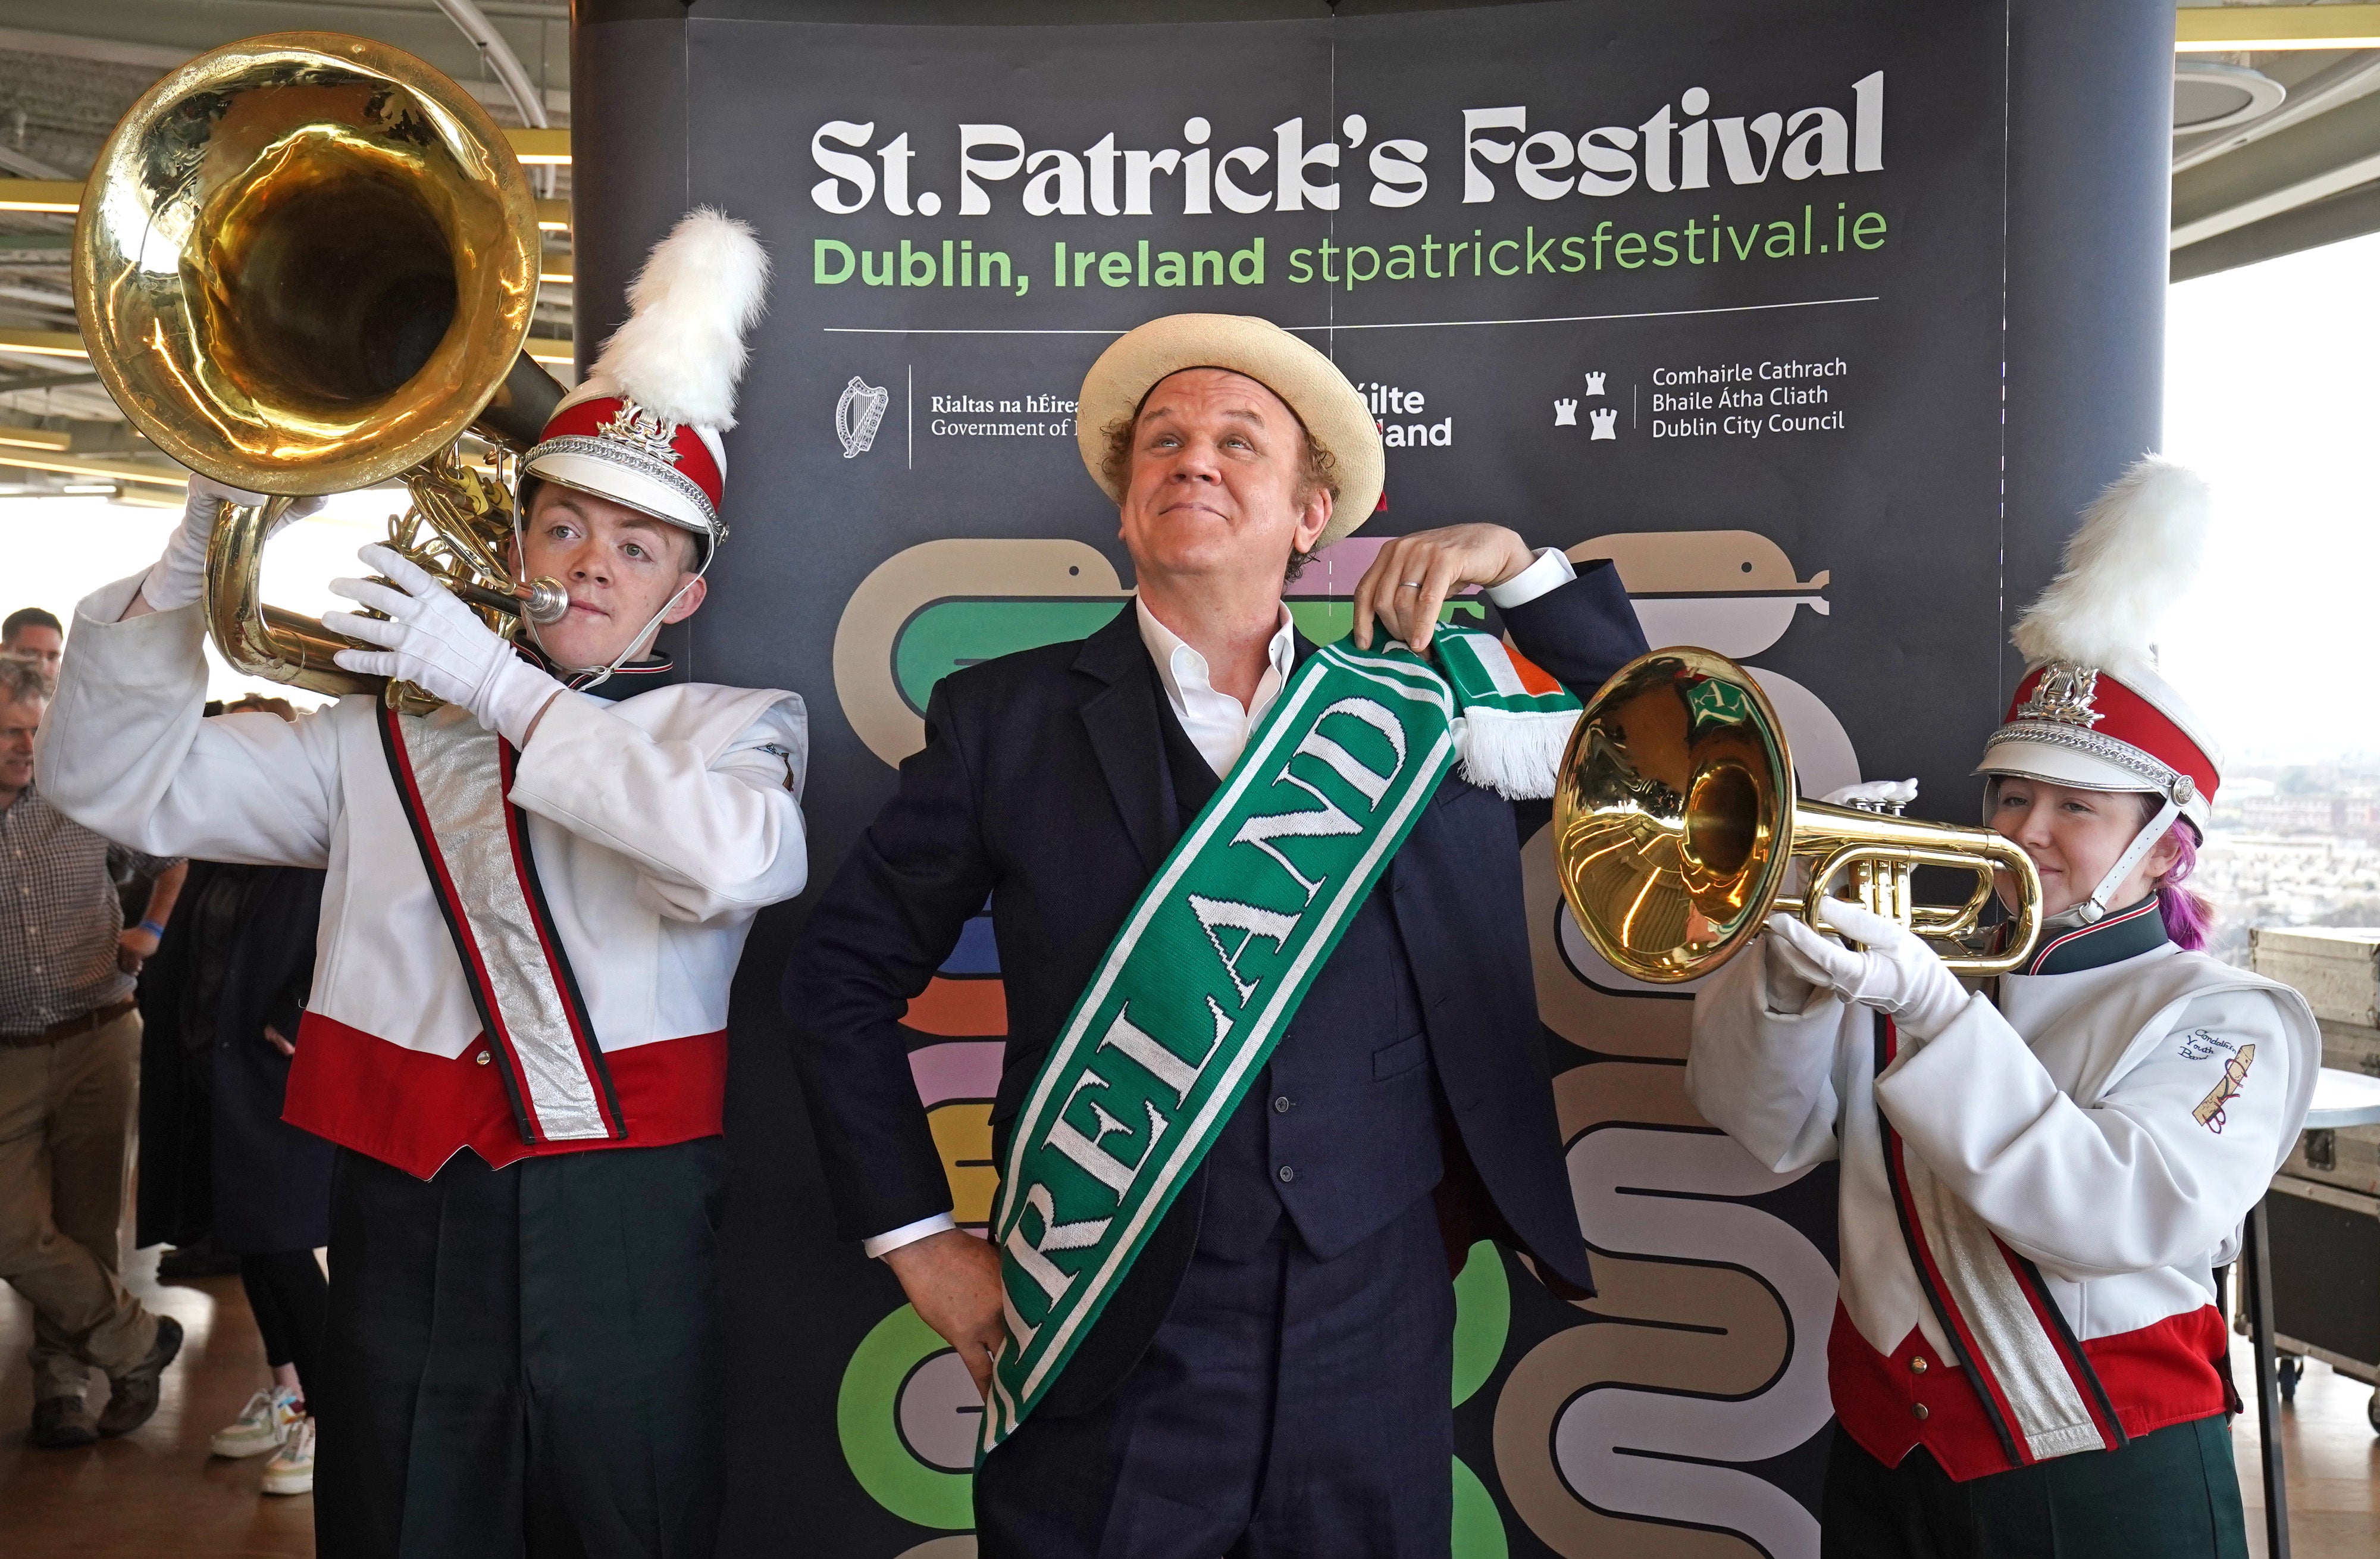 Irish-American-actor John C Reilly will be the international guest of honour at the Dublin parade (Brian Lawless/PA)